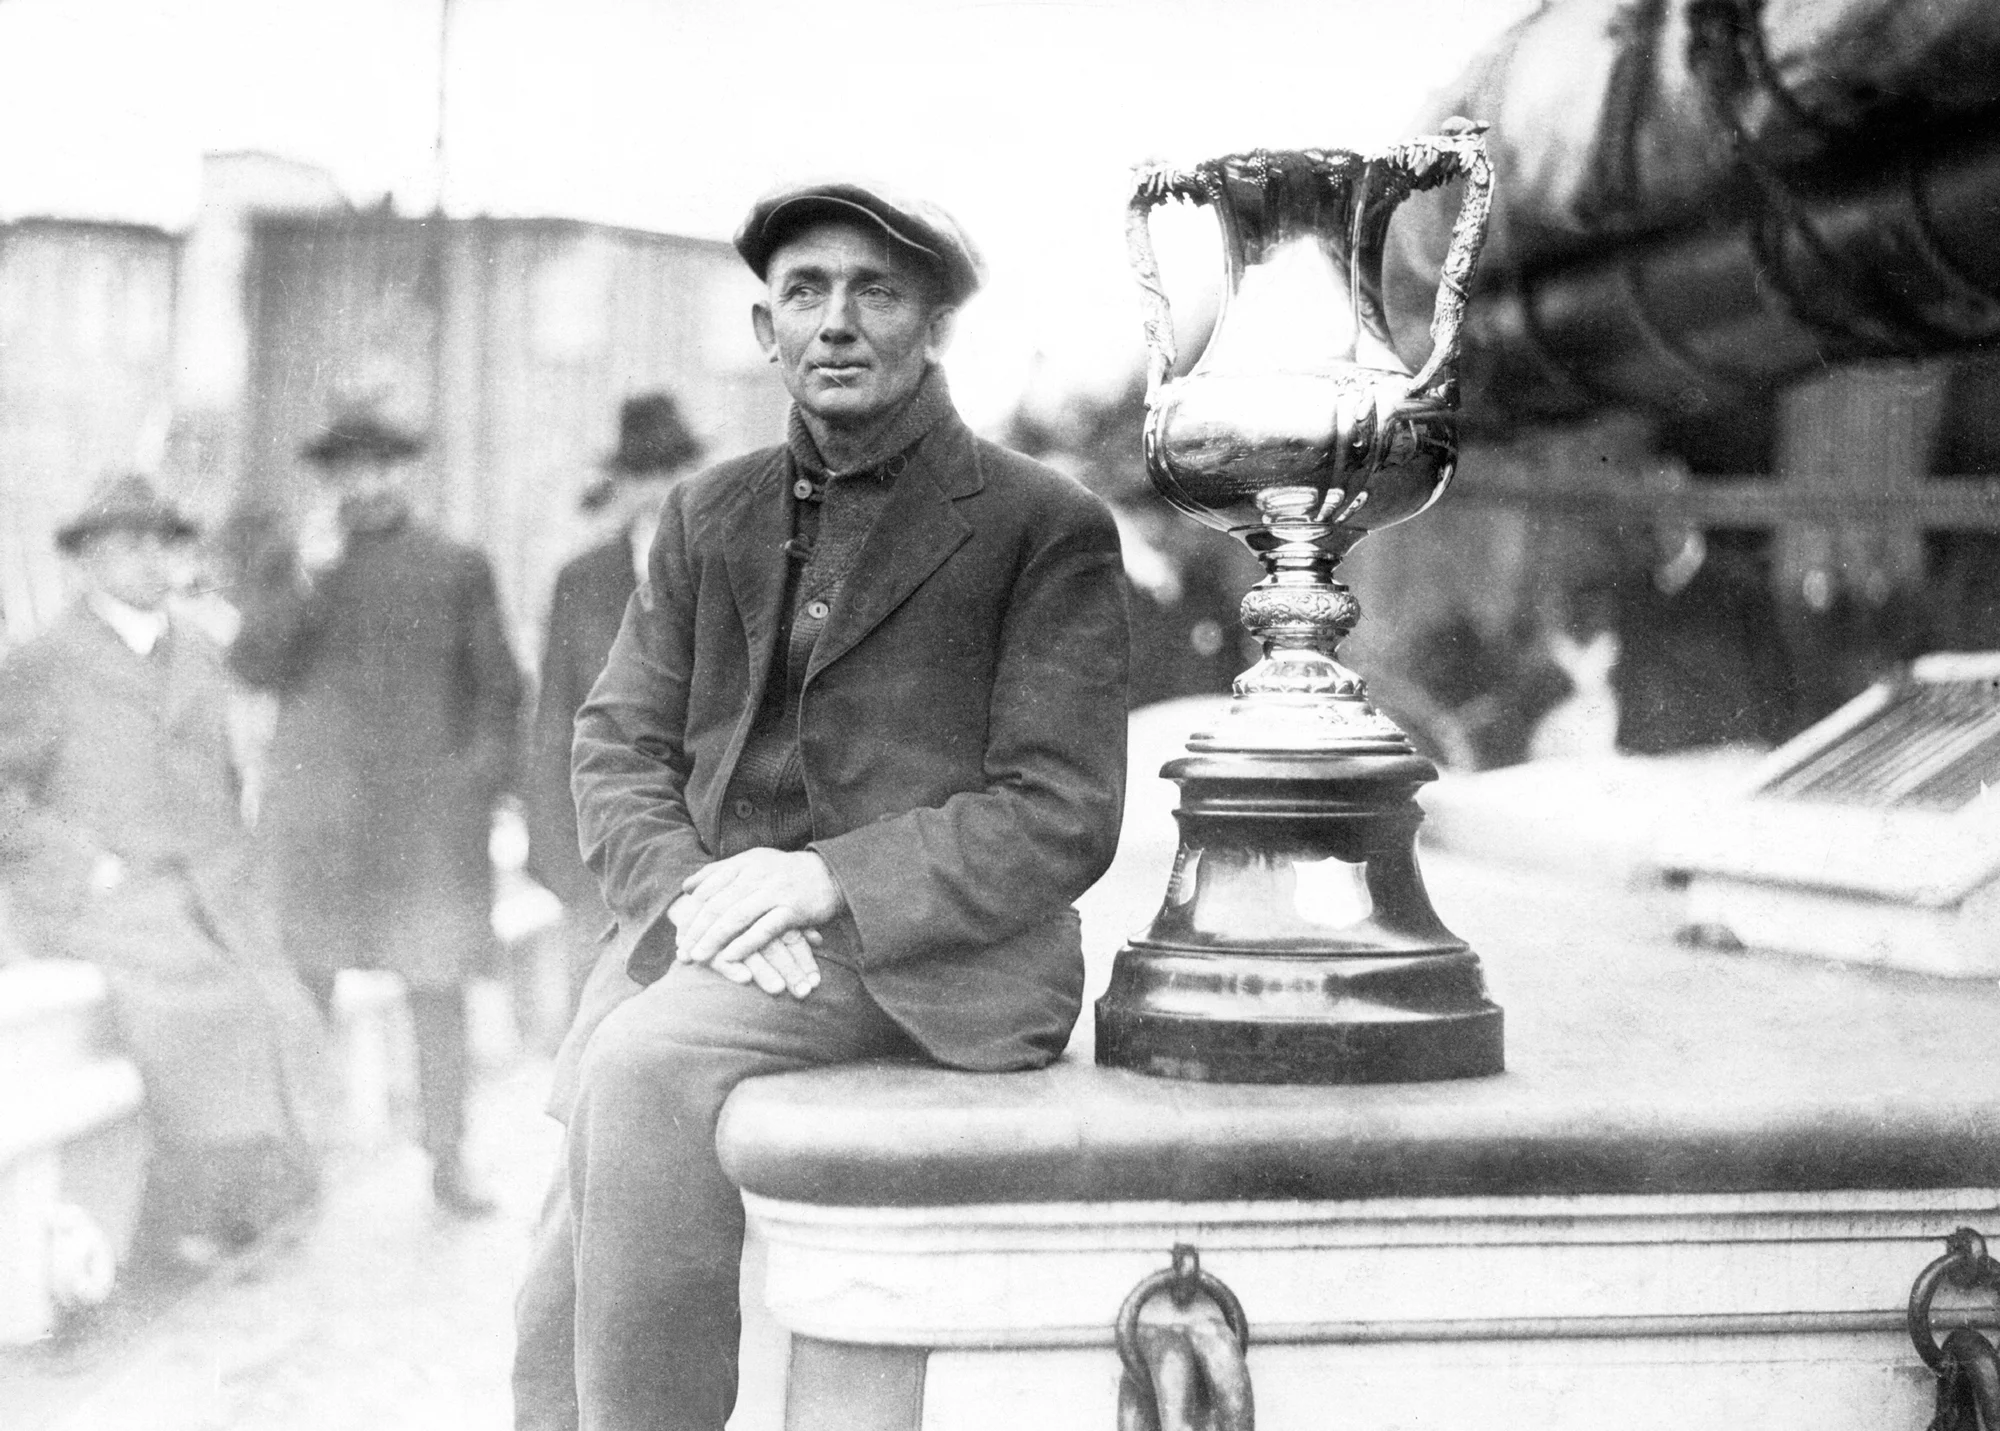 Bluenose - RCM - Captain Angus Walters with the International Fishermen’s Trophy on the deck of the Bluenose, 1921